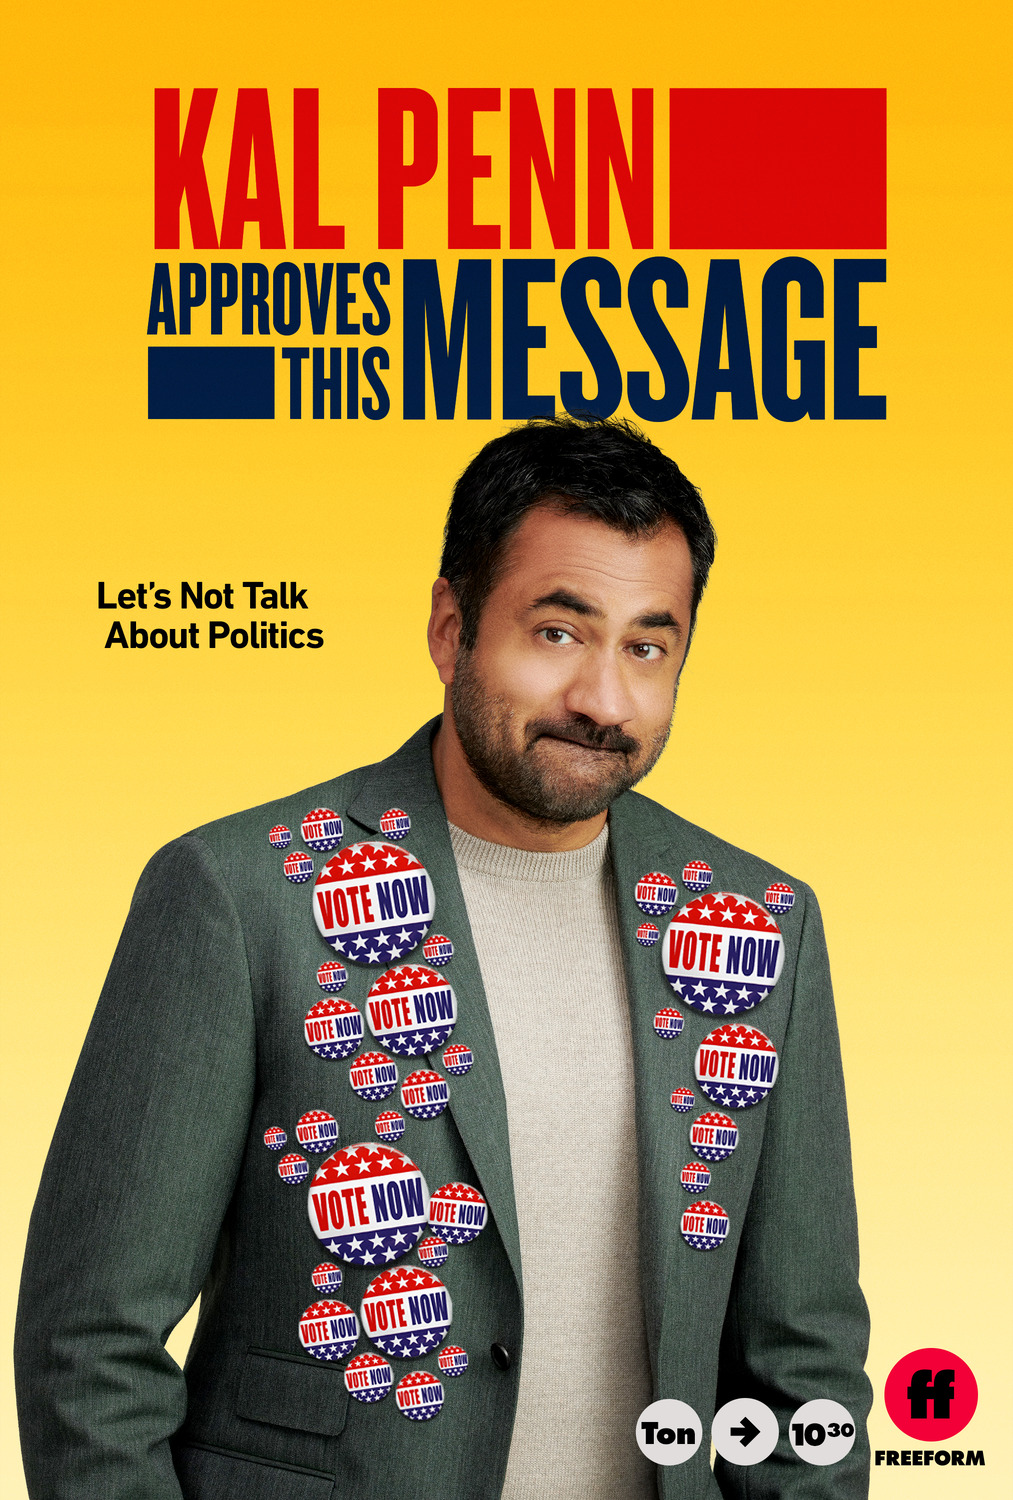 Extra Large TV Poster Image for Kal Penn Approves This Message (#2 of 6)